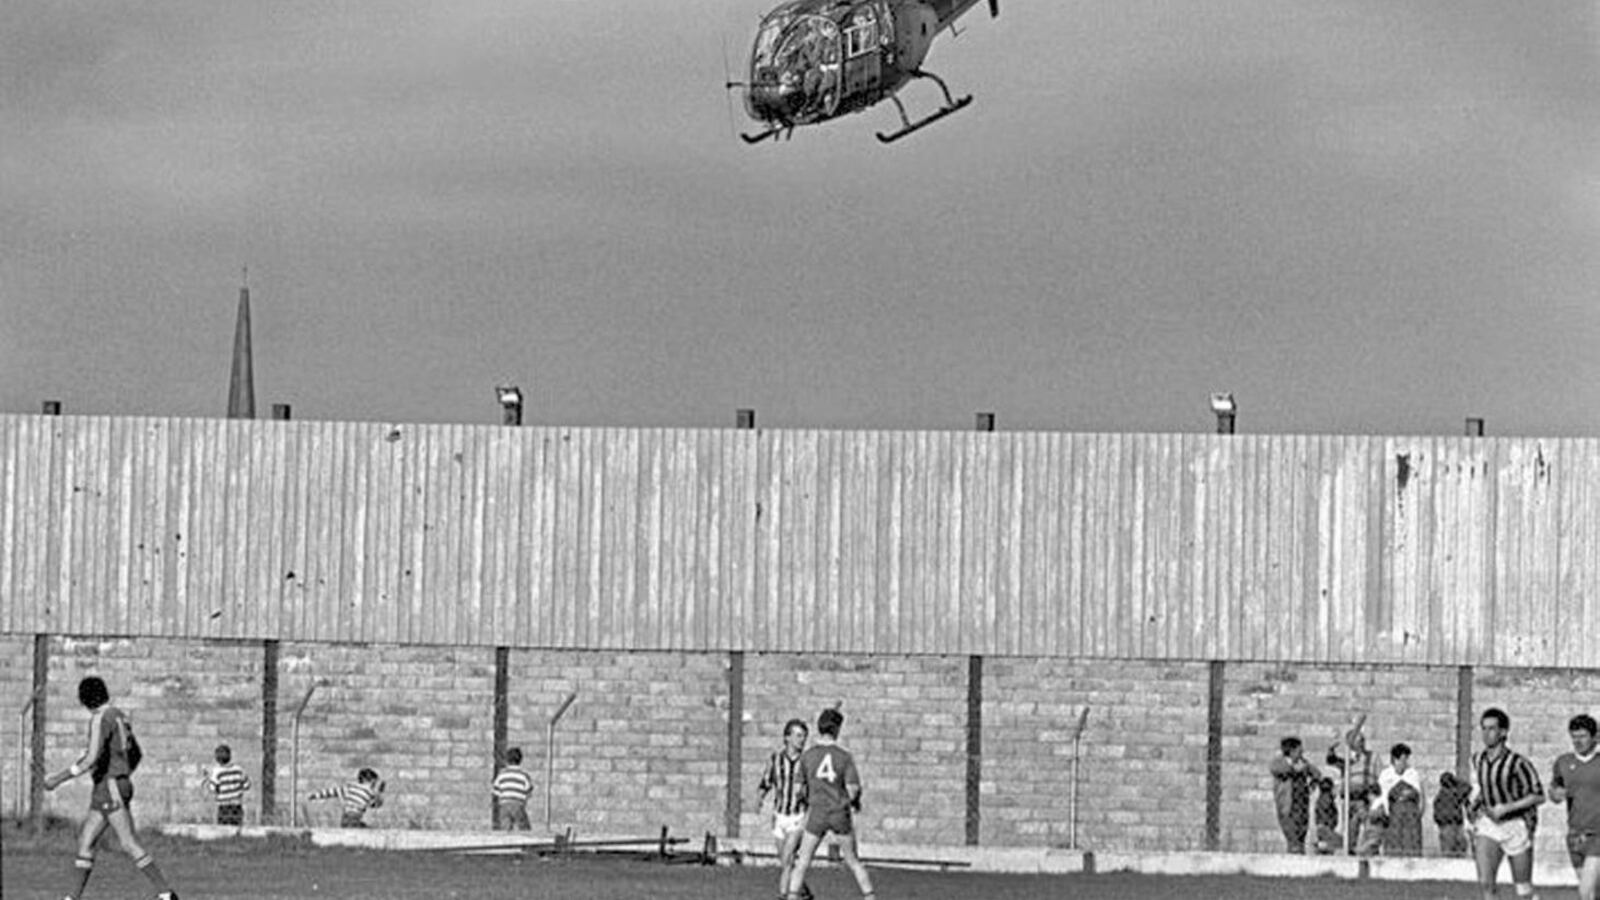 Army Helicopter at GAA Game Sparks Angry Protests – On This Day in 1974 ...